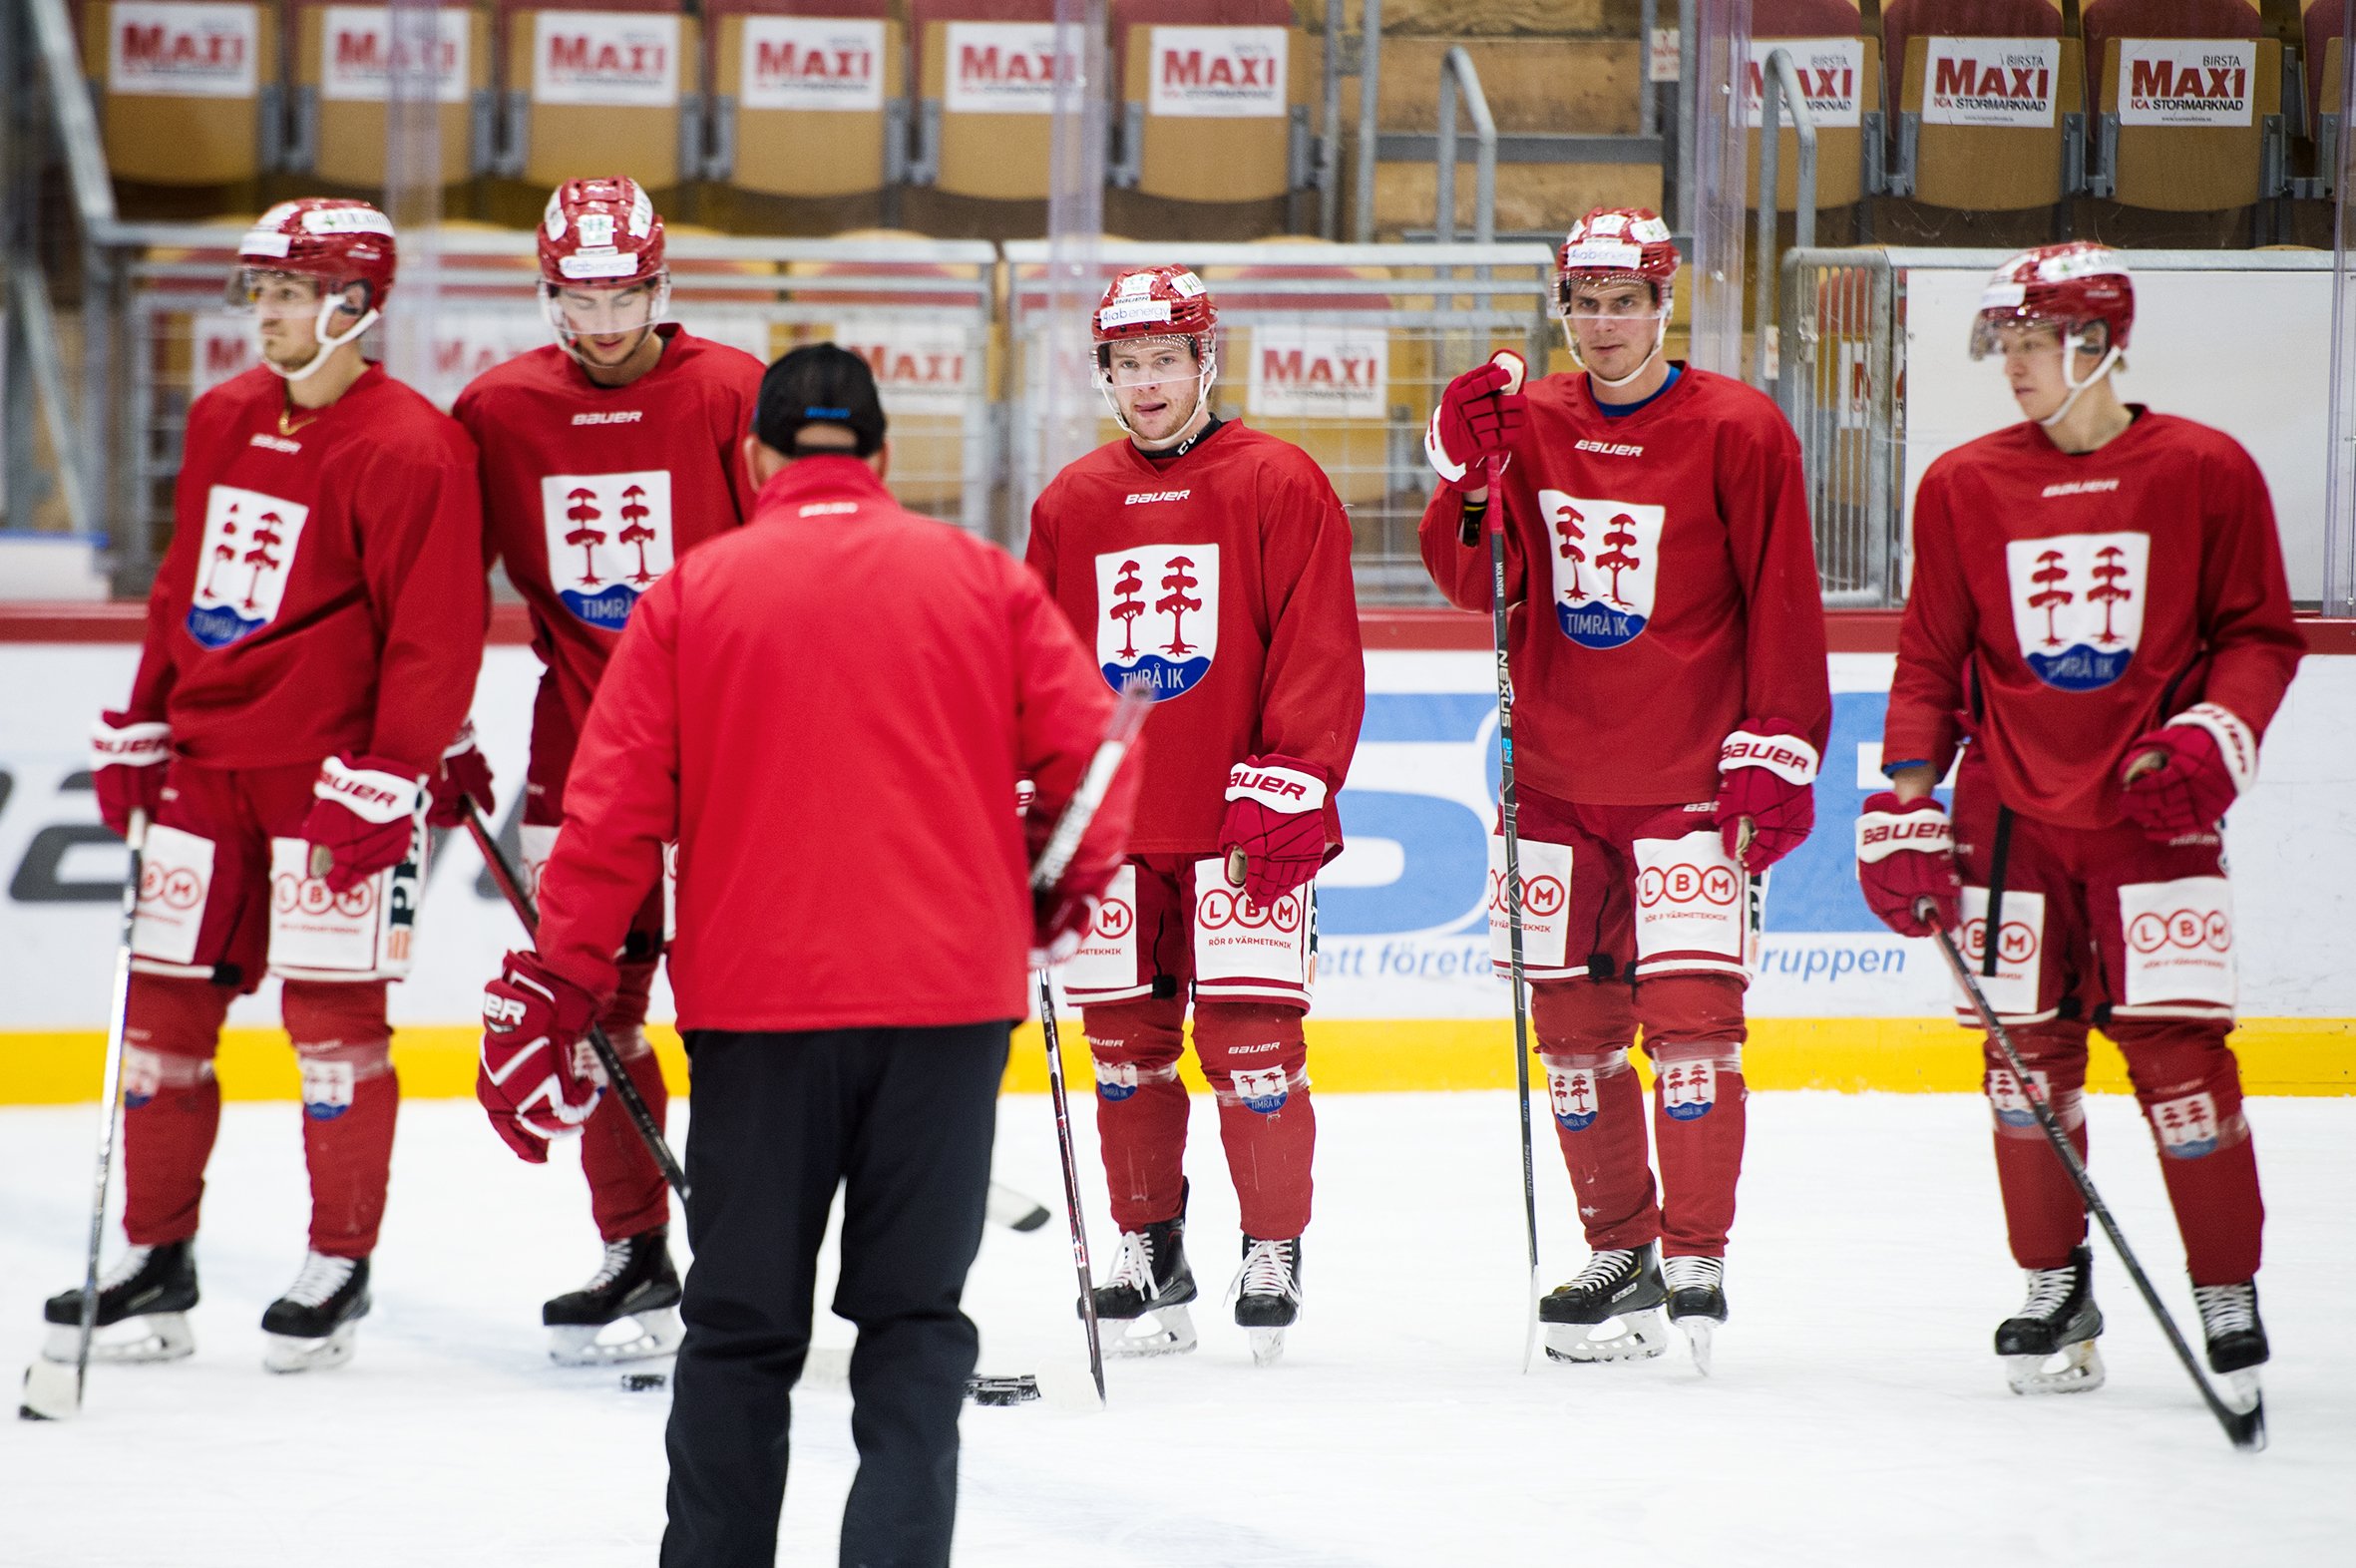 Hampus Larsson, Jacob Olofsson, Sebastien Ohlsson, Andreas Molinder and Vilmos Gallo receive instructions from coach Fredrik Andersson.